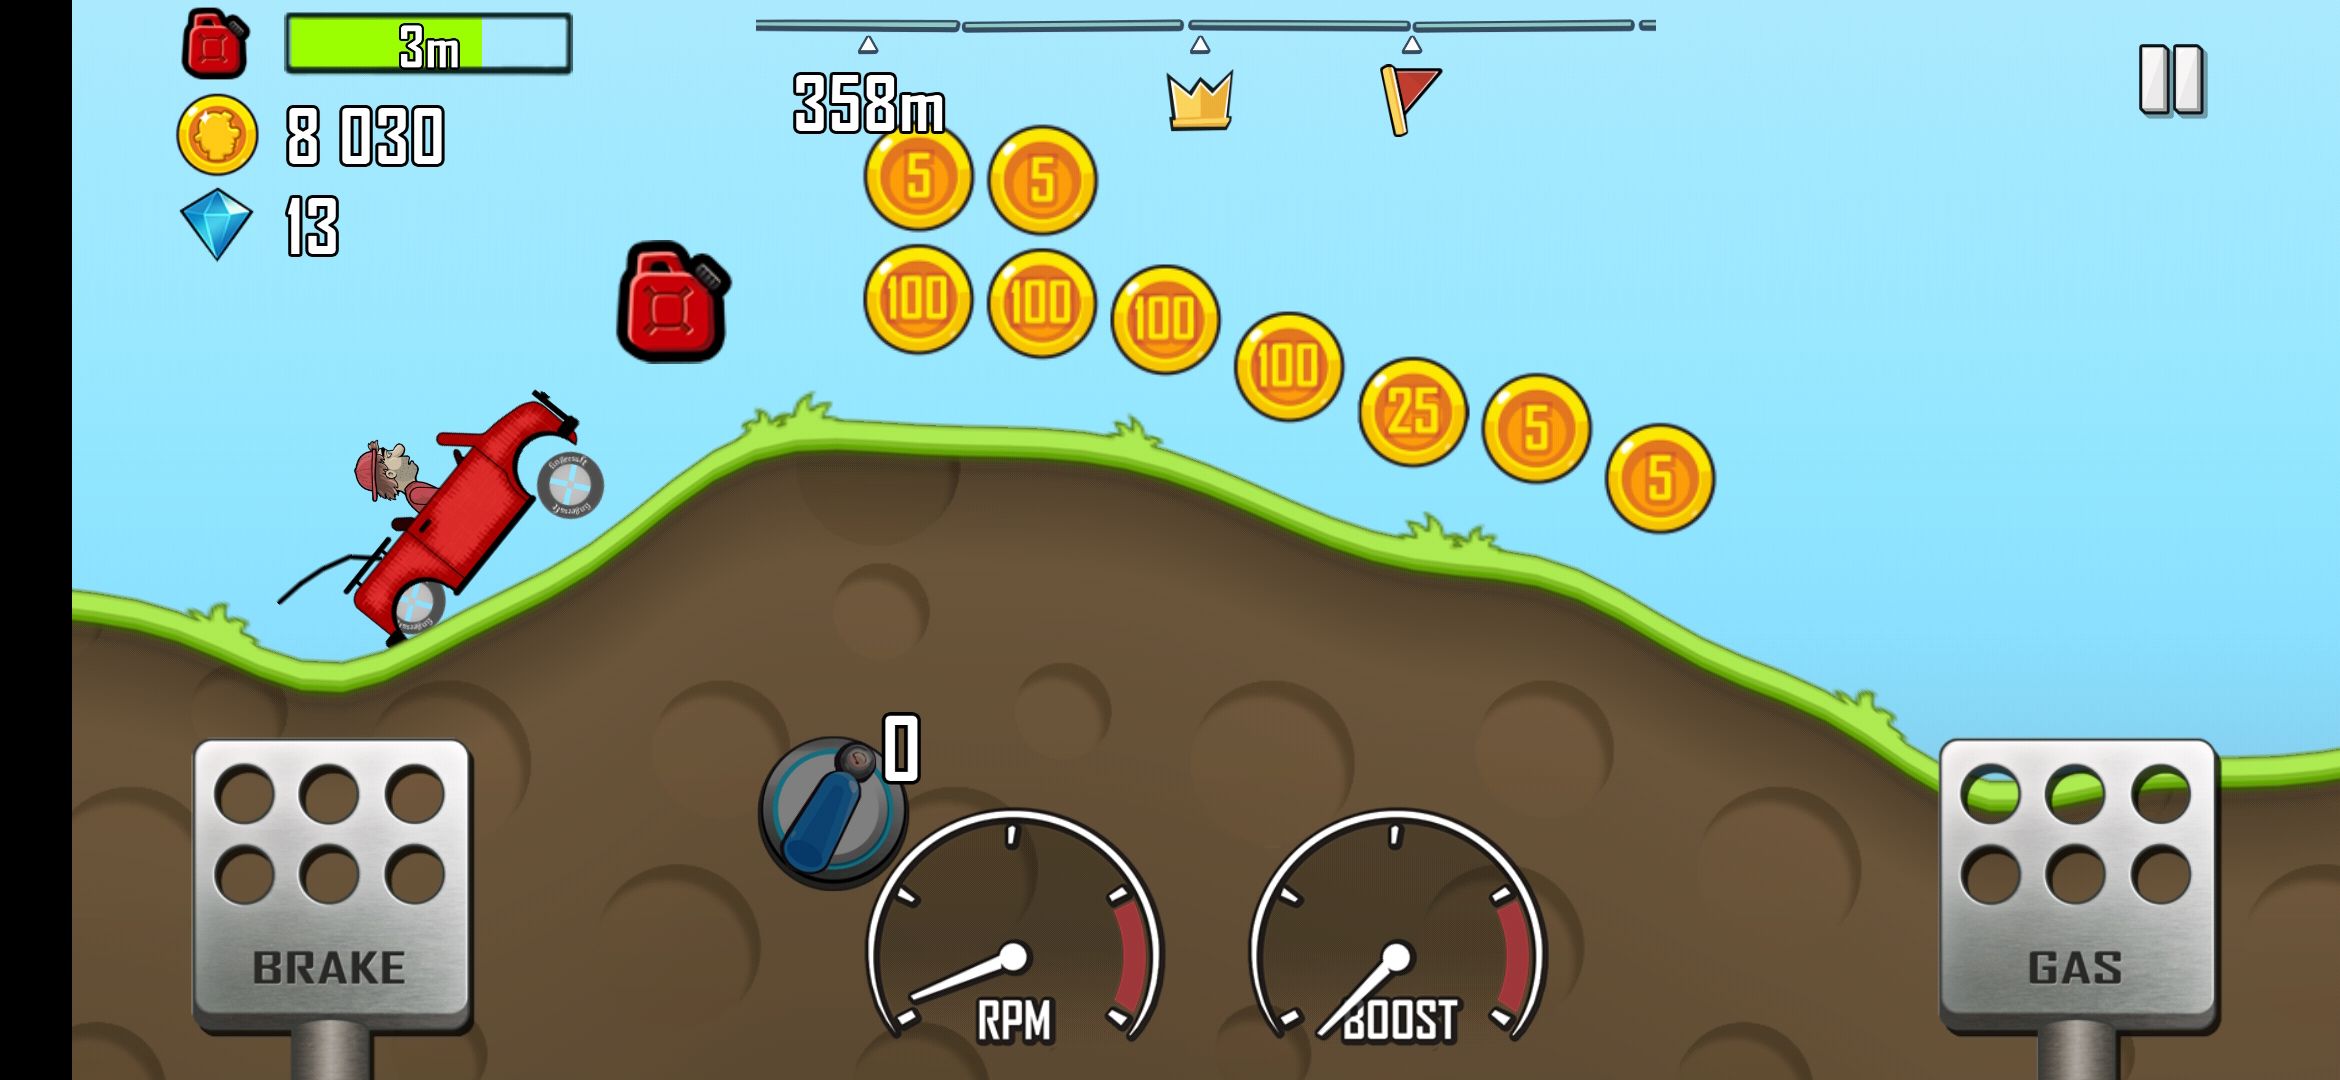 Hill Climb Racing Gameplay Showing Collectables